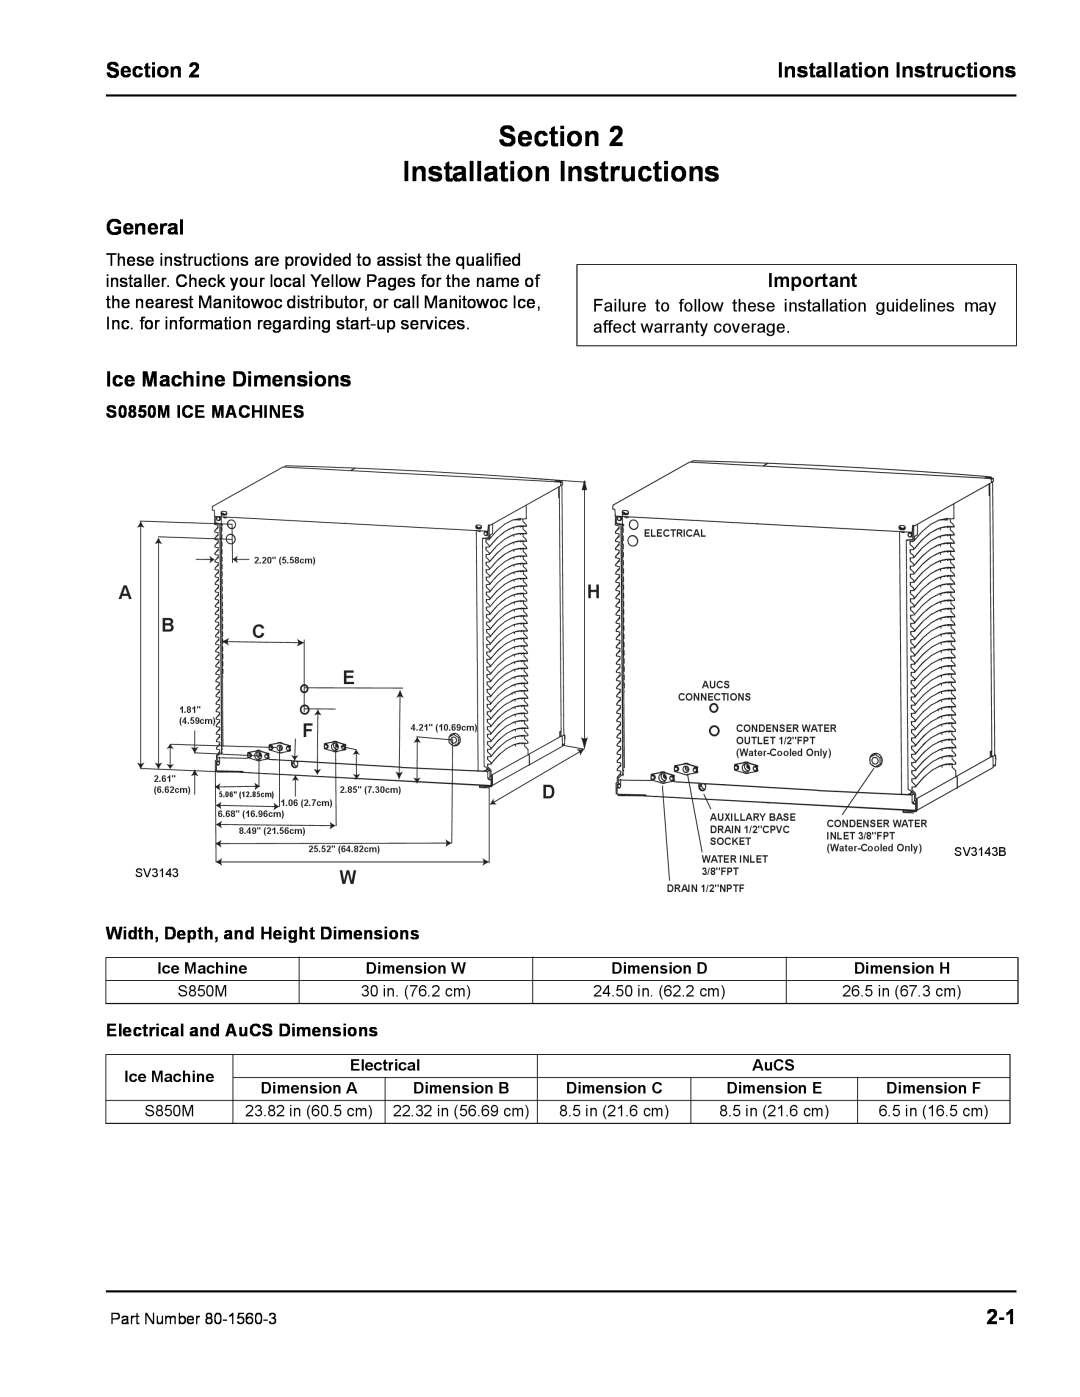 Manitowoc Ice manual Section Installation Instructions, General, Ice Machine Dimensions, S0850M ICE MACHINES 